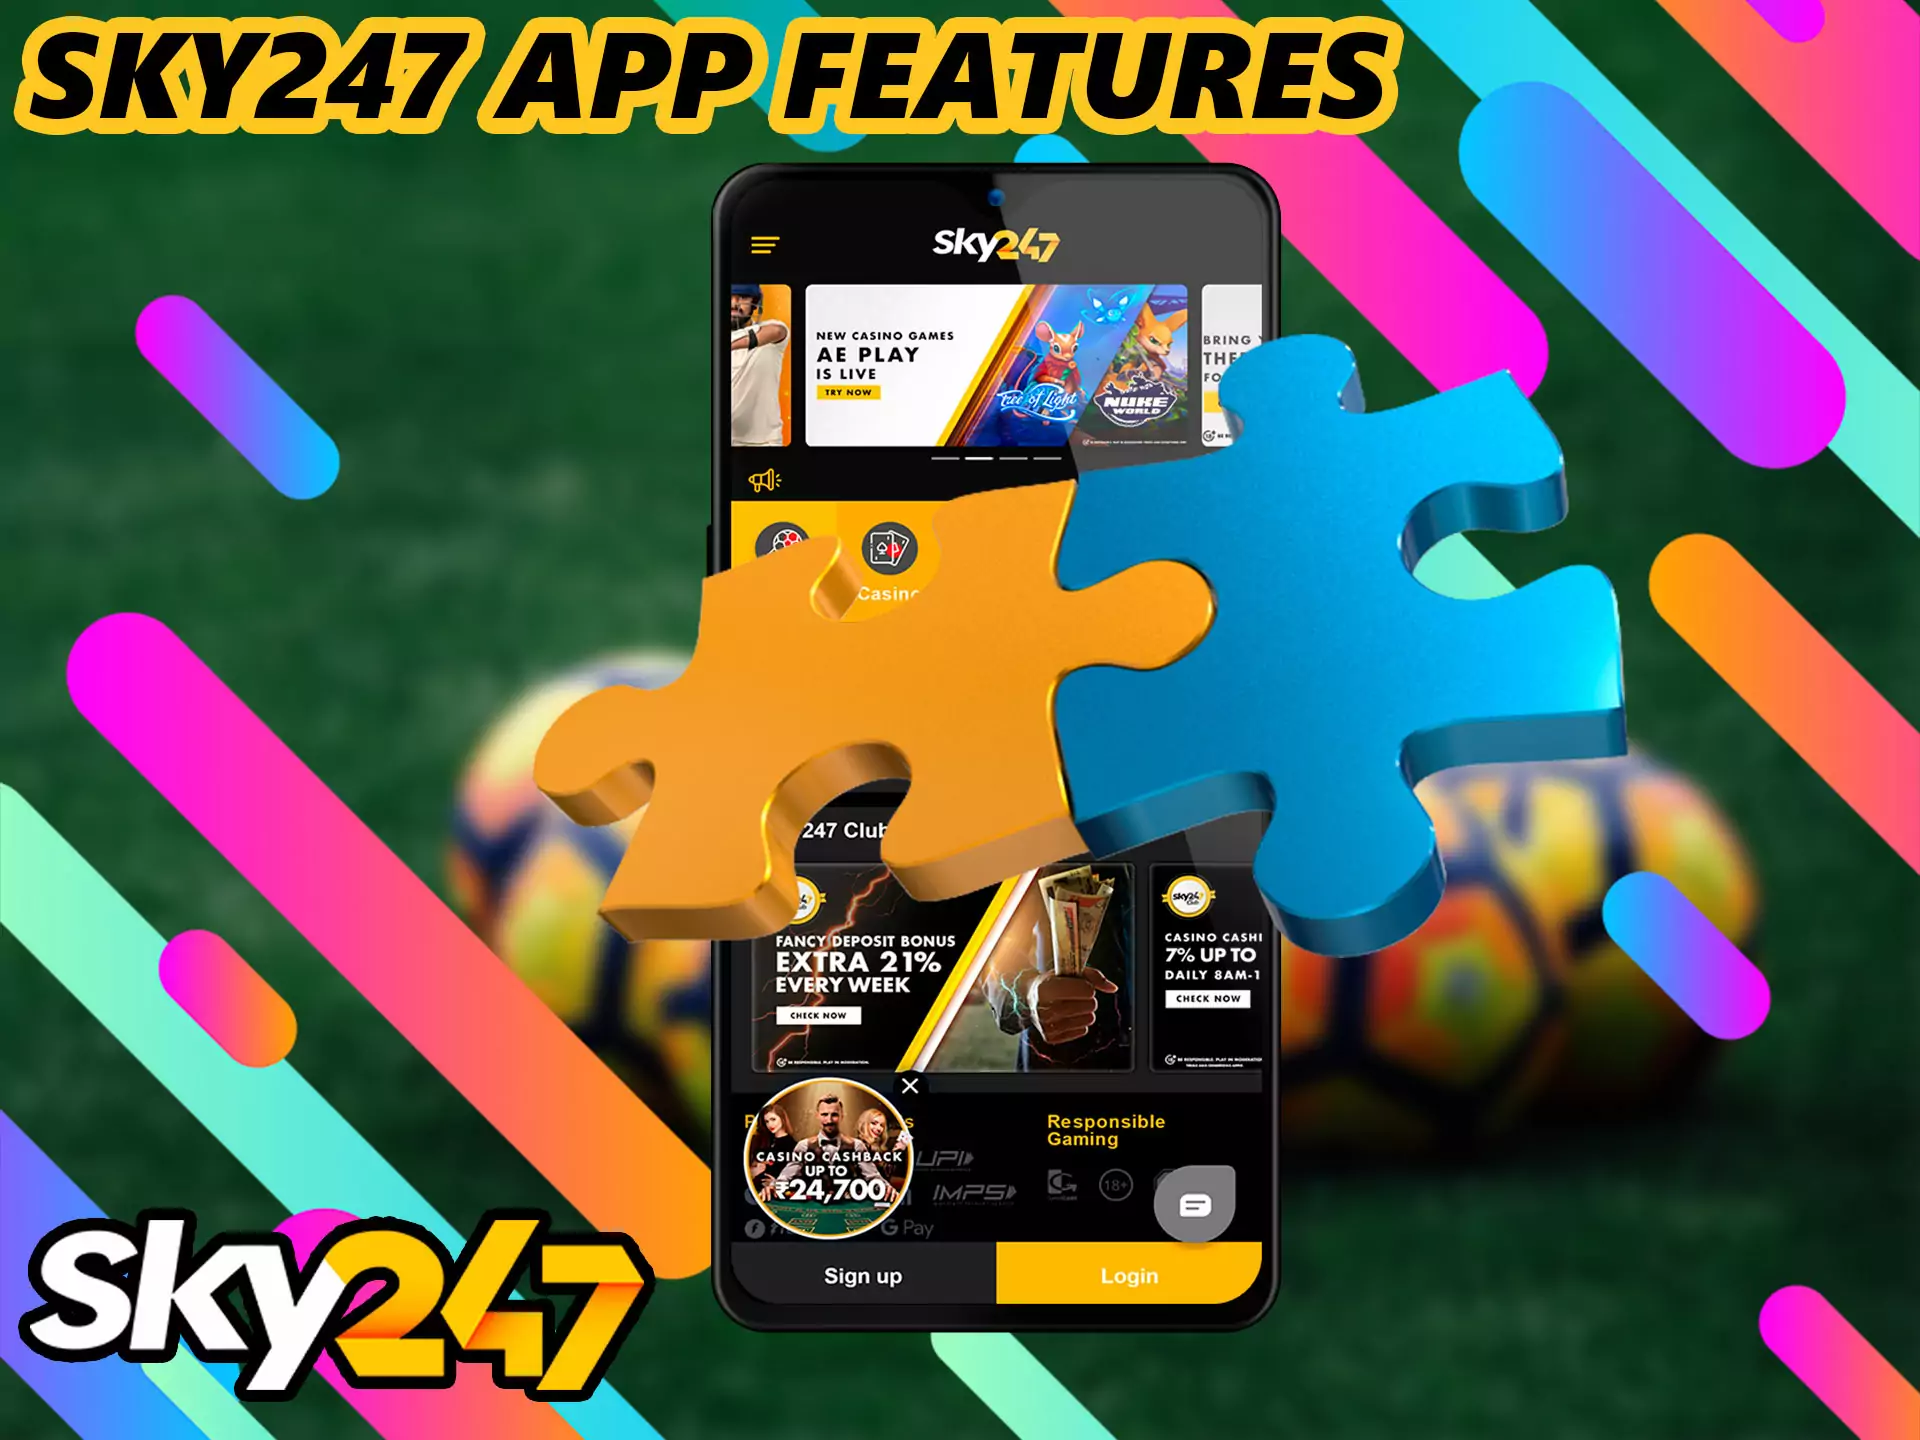 Get 24/7 access to your account and bets for you, track results right on your mobile device.